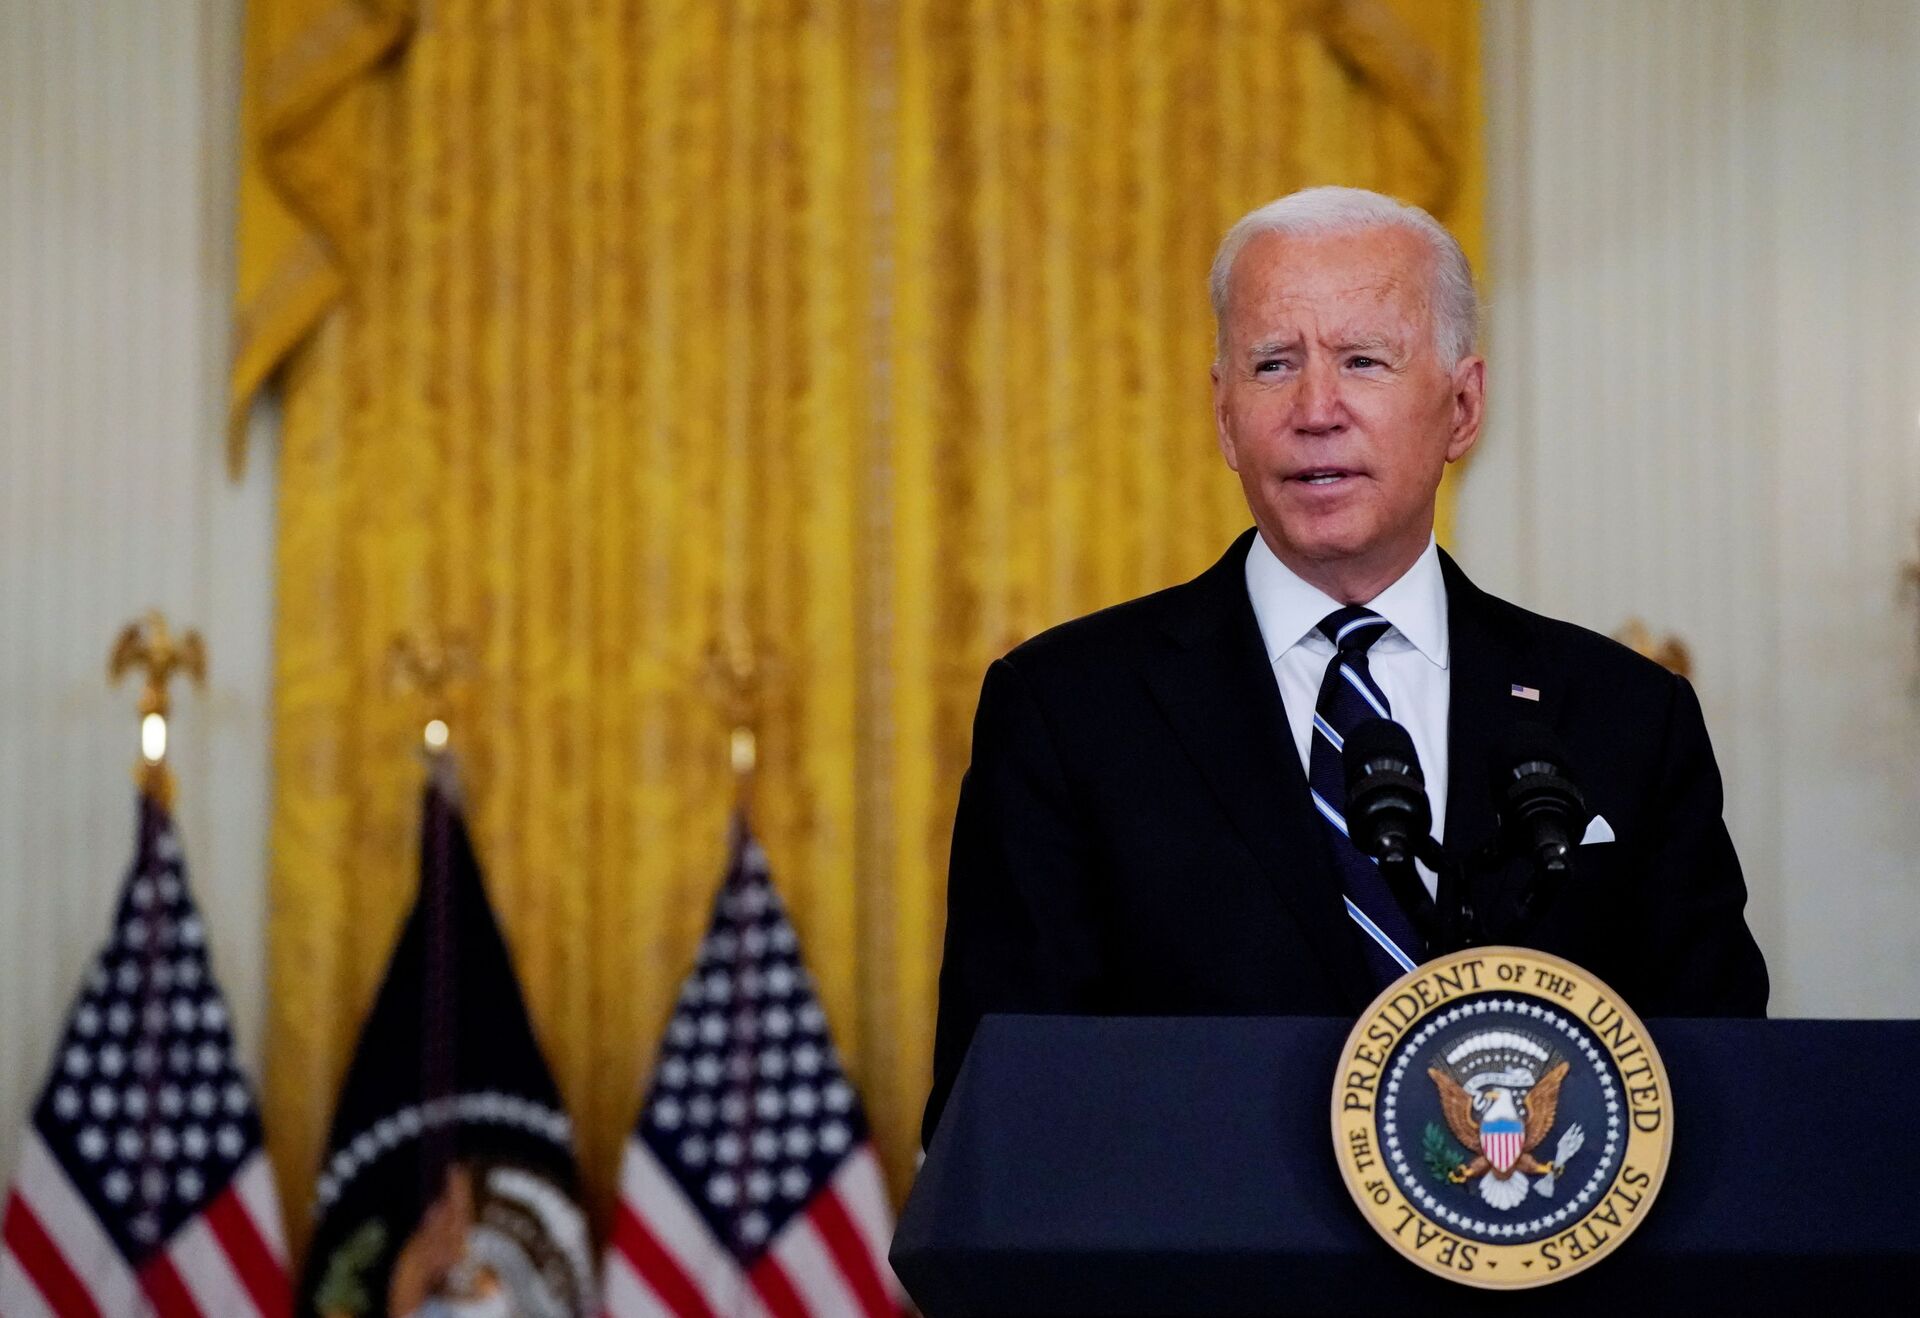 U.S. President Joe Biden delivers remarks on the coronavirus disease (COVID-19) response and  vaccination program during a speech in the East Room at the White House in Washington, U.S., August 18, 2021. - Sputnik International, 1920, 07.09.2021